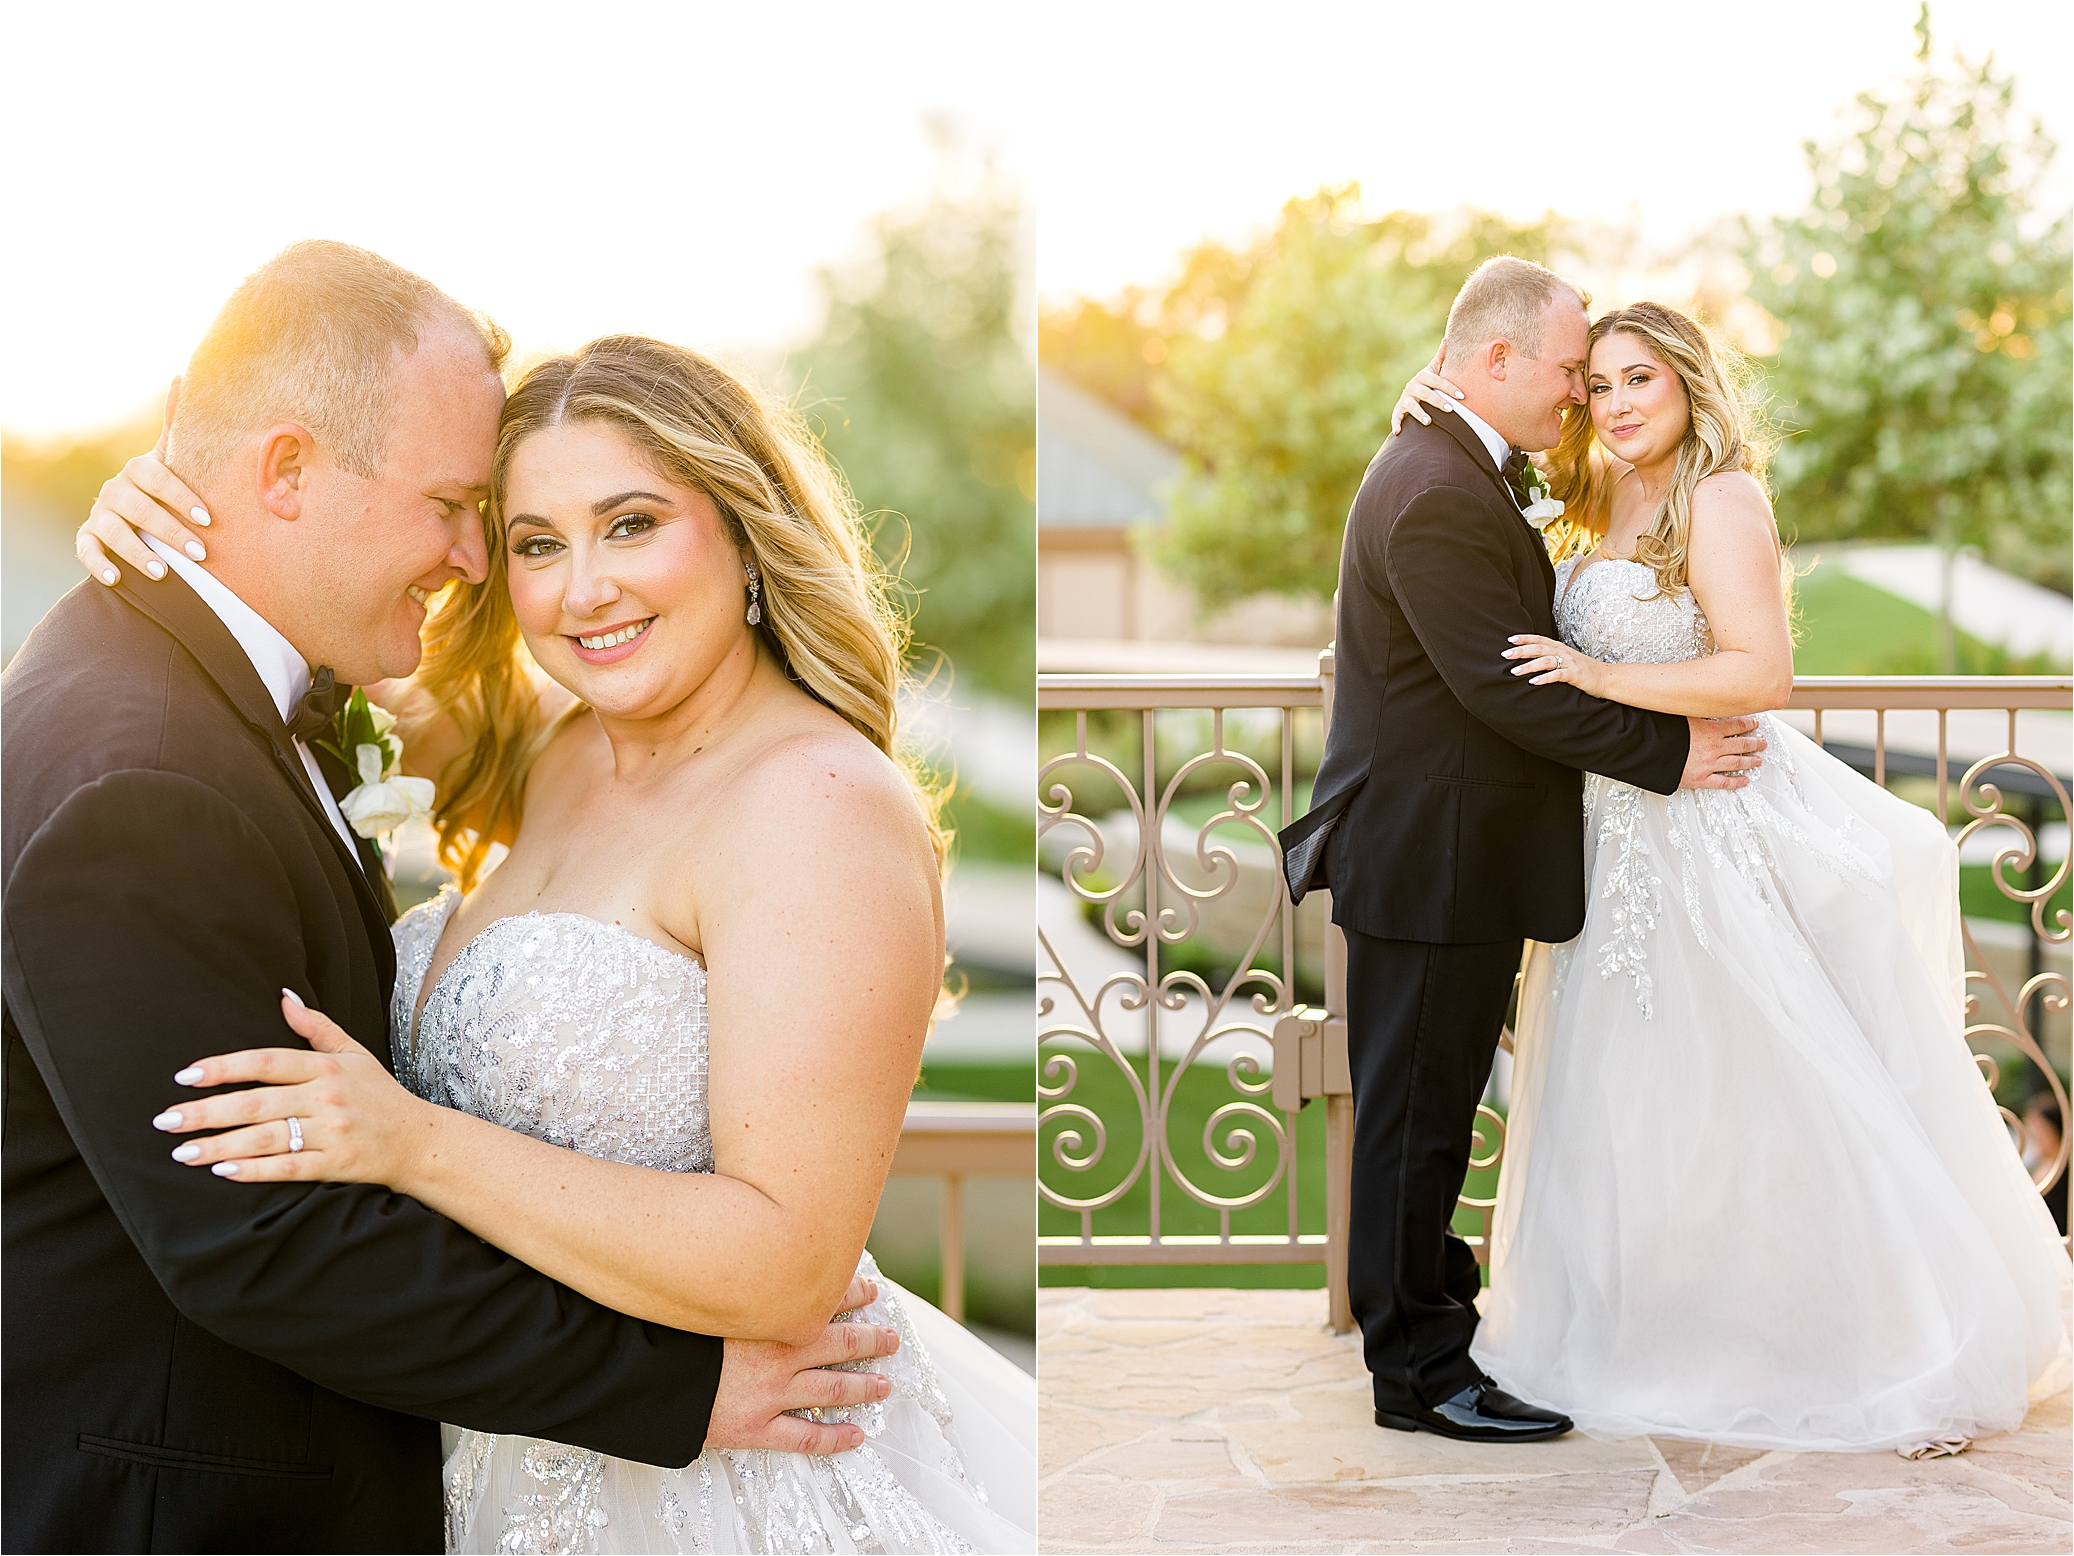 A bride leans into her groom and smiles during sunset newlywed photos on a balcony at The Redberry Estate in San Antonio, Texas